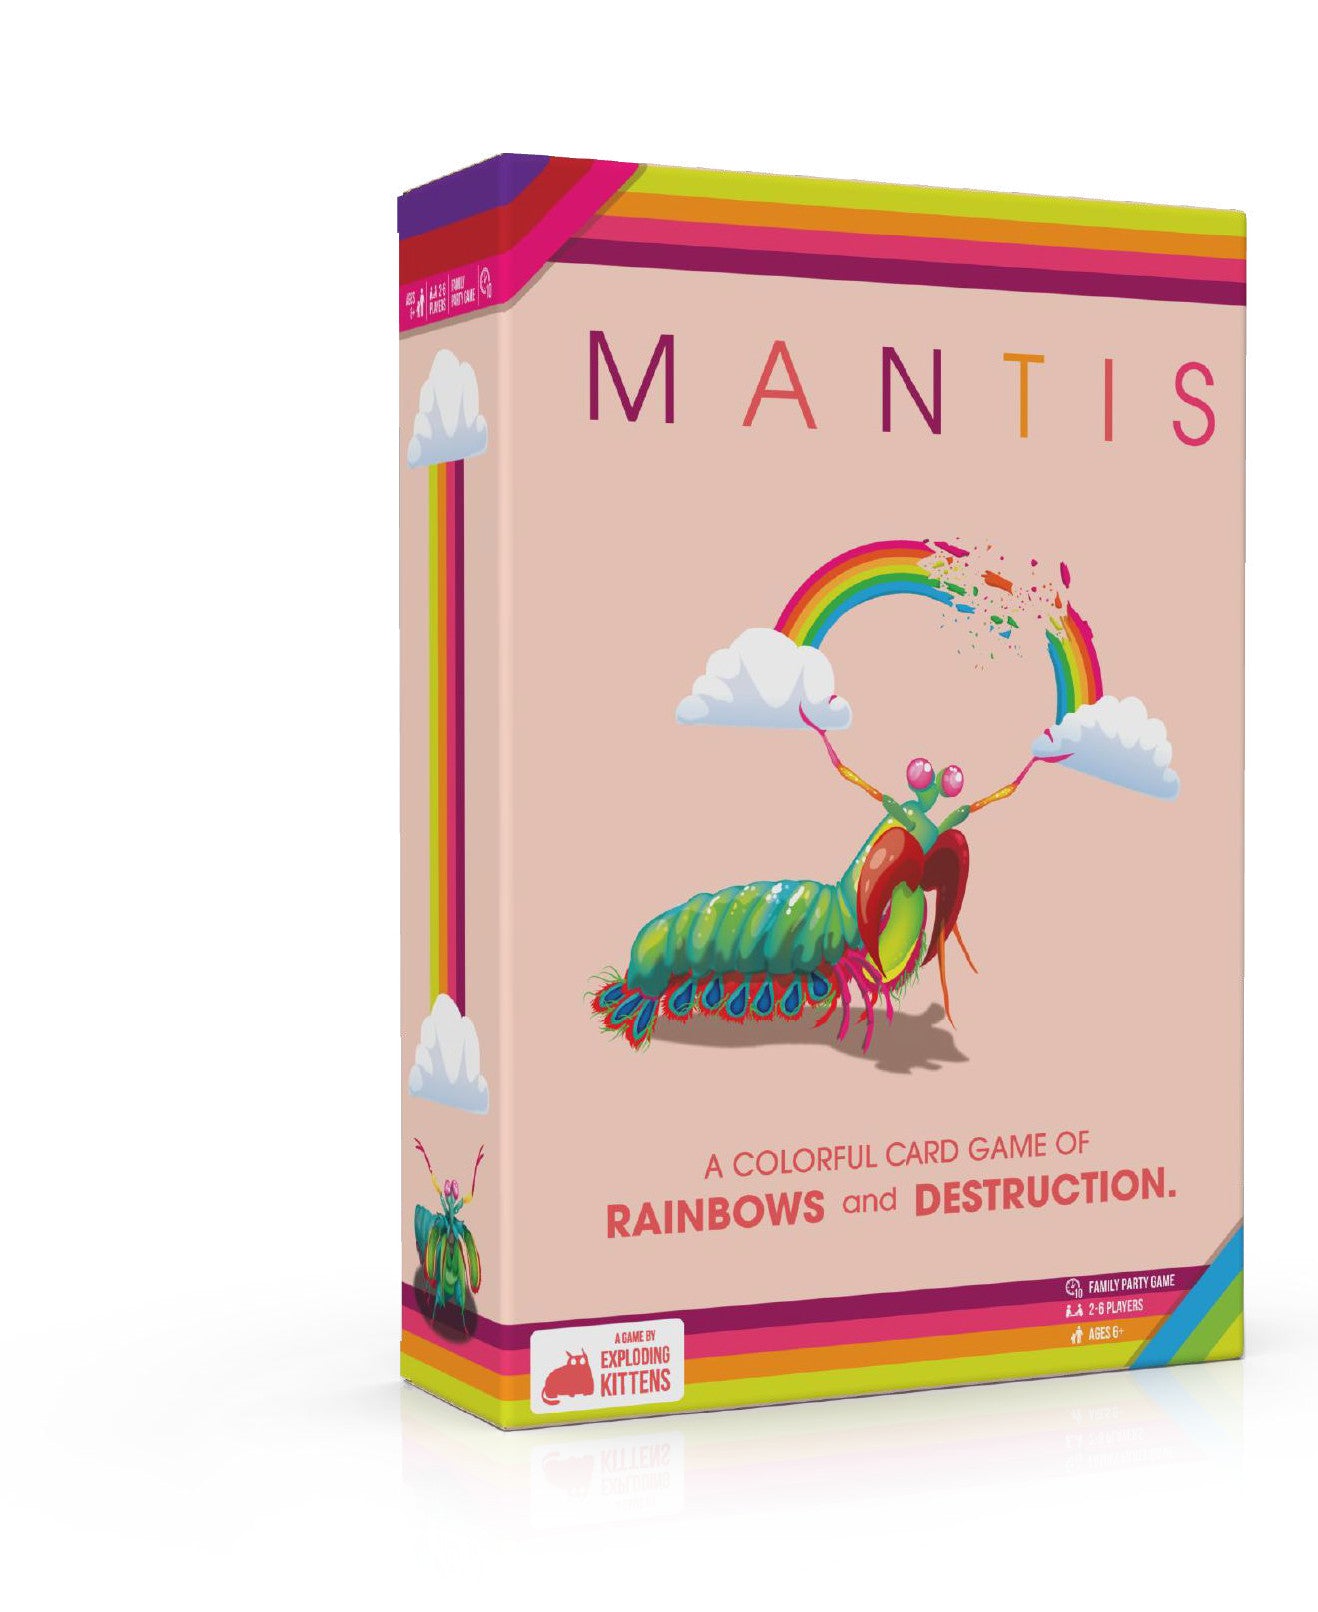 Mantis (By Exploding Kittens) - Toybox Tales